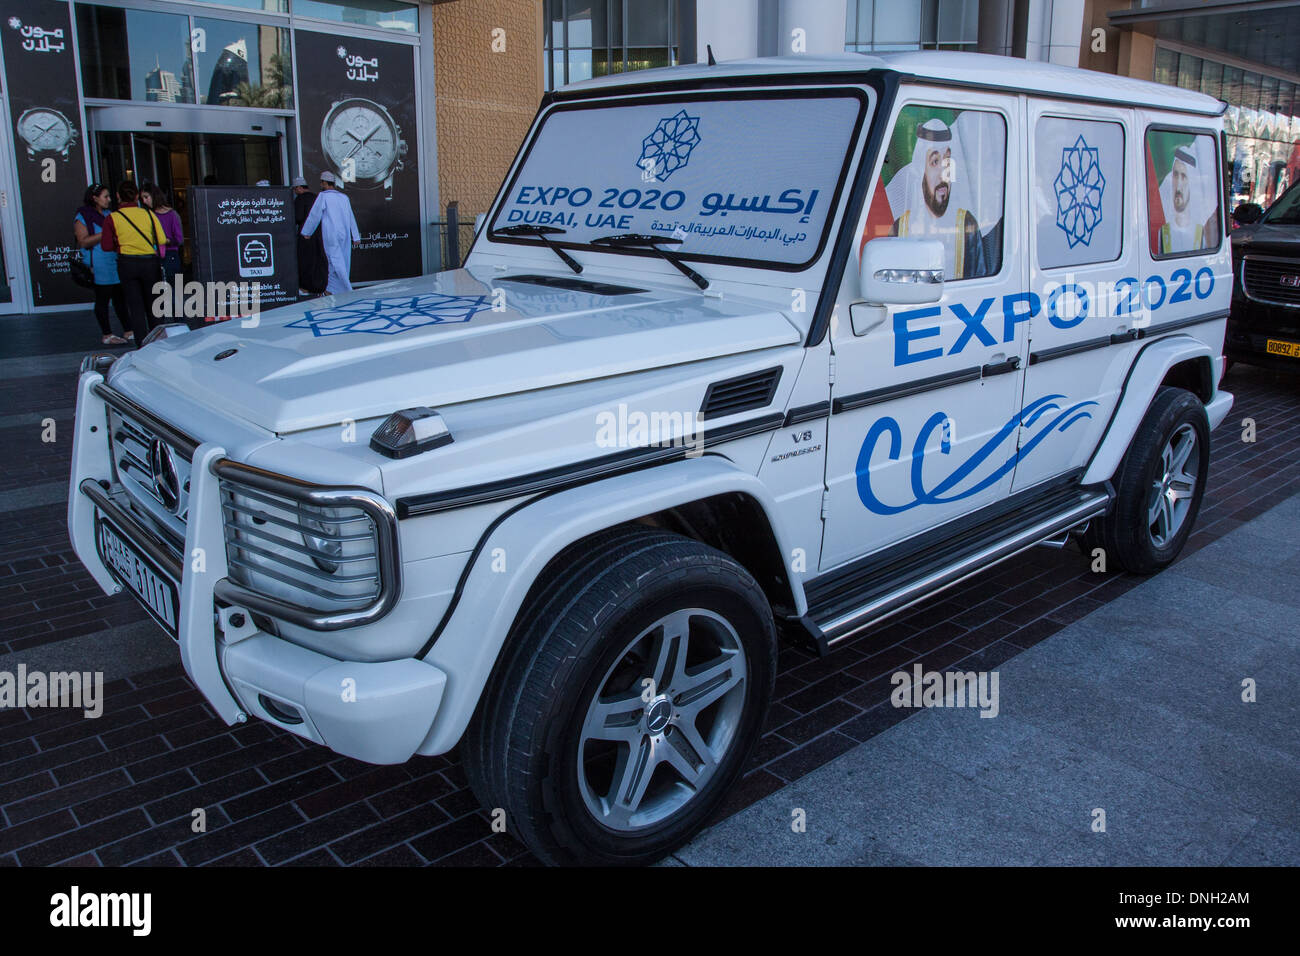 MERCEDES 4X4 IN THE COLORS OF THE 2020 WORLD EXPO WITH SHEIKH KHALIFA, PRESIDENT OF THE UNITED ARAB EMIRATES, IN FRONT AND SHEIKH MOHAMMED, PRIME MINISTER AND RULER OF DUBAI IN THE BACK, DUBAI MALL, DOWNTOWN DUBAI, DUBAI, UNITED ARAB EMIRATES, MIDDLE EAST Stock Photo